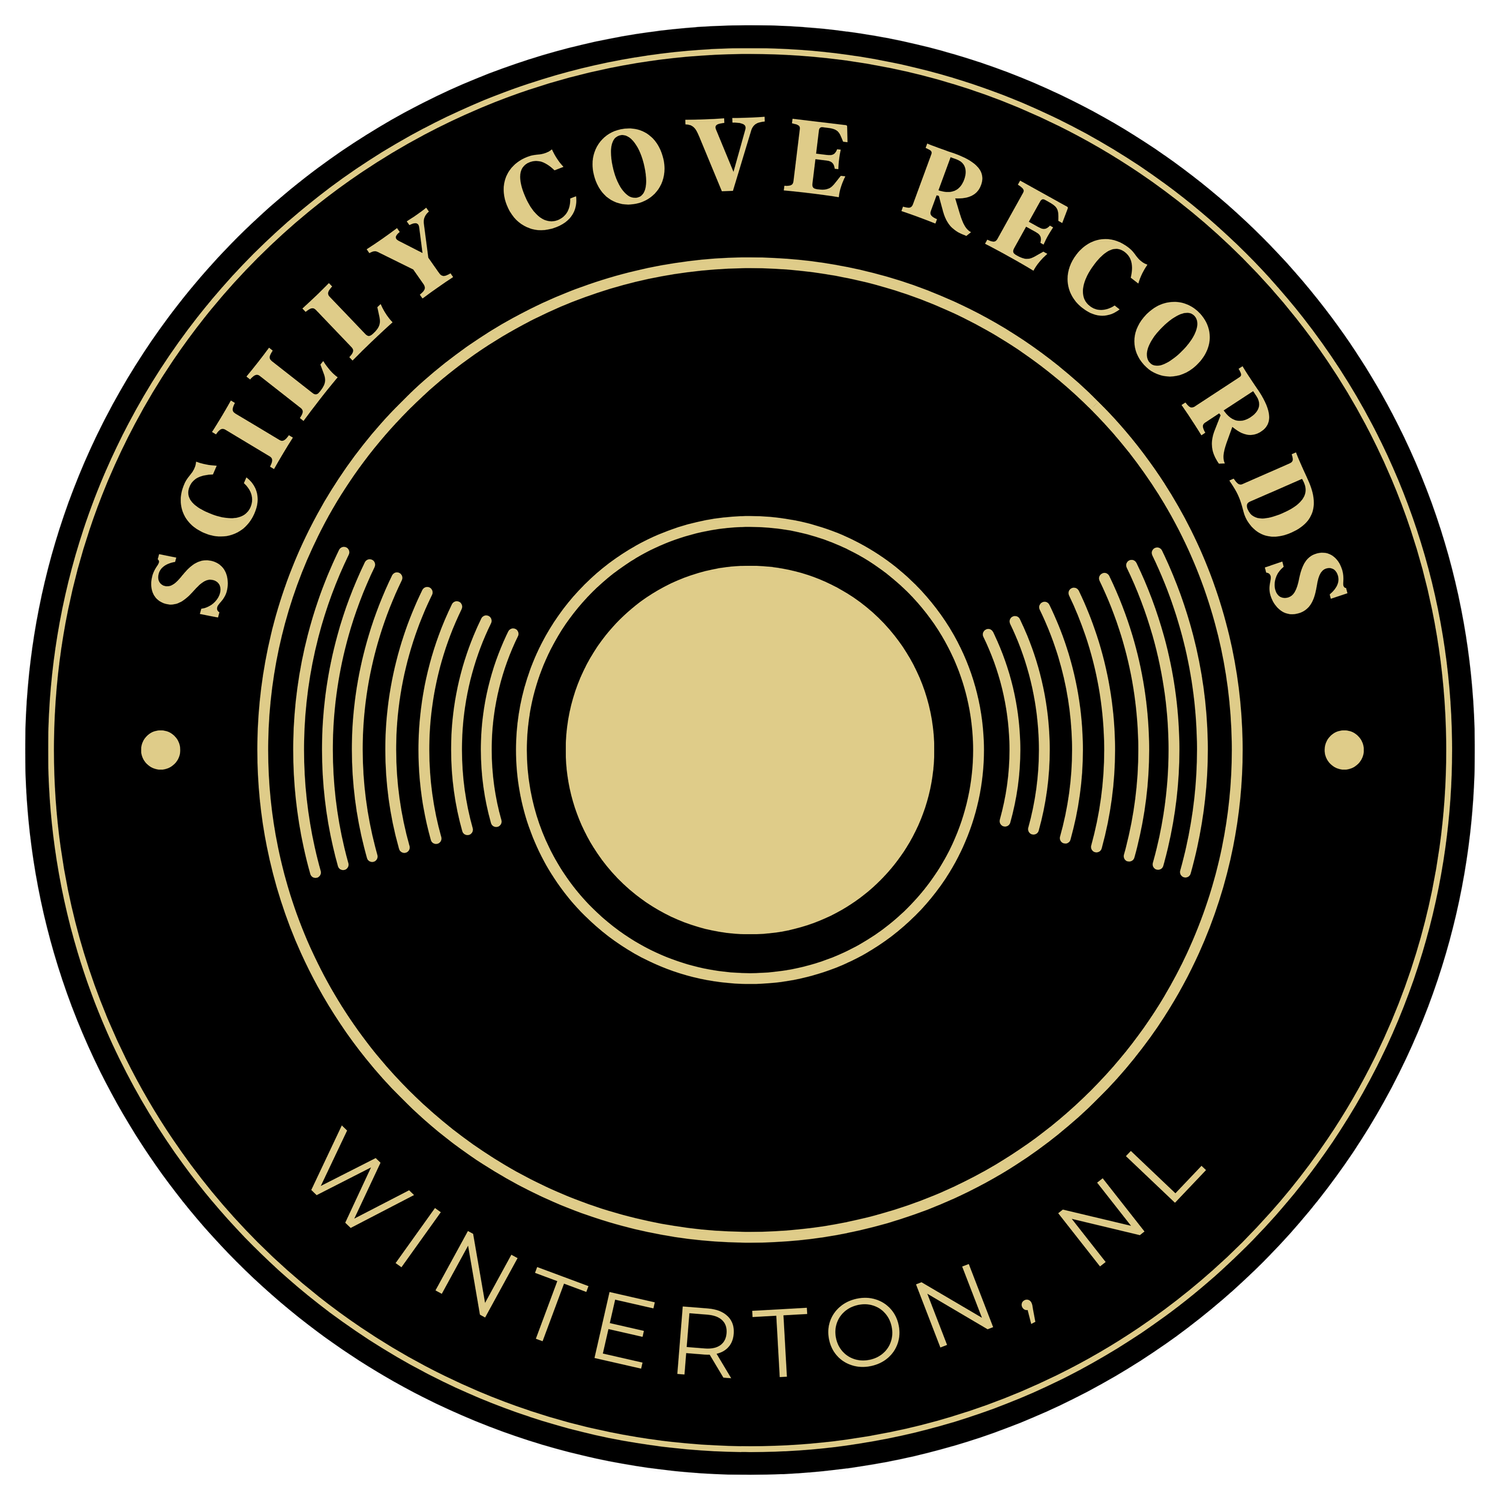 Scilly Cove Records